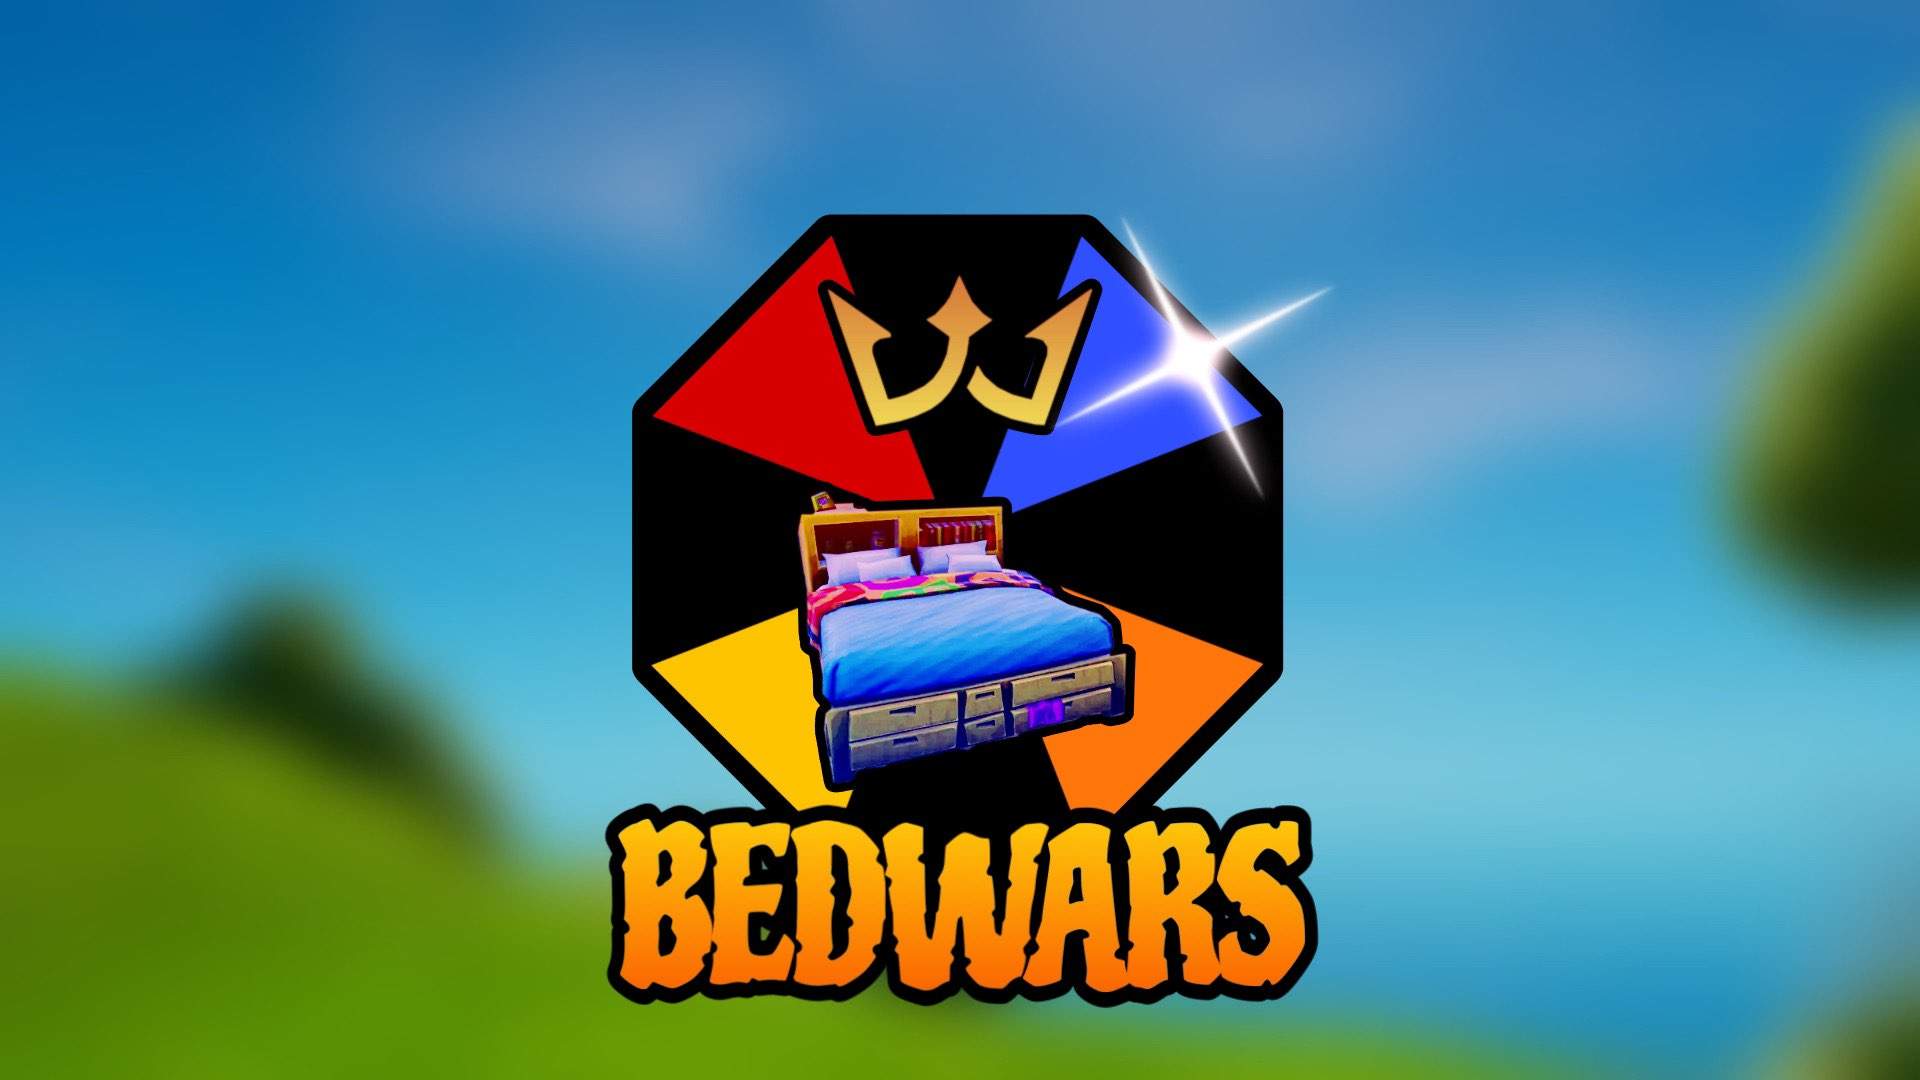 Bed Wars - My 2 maps for BedWars